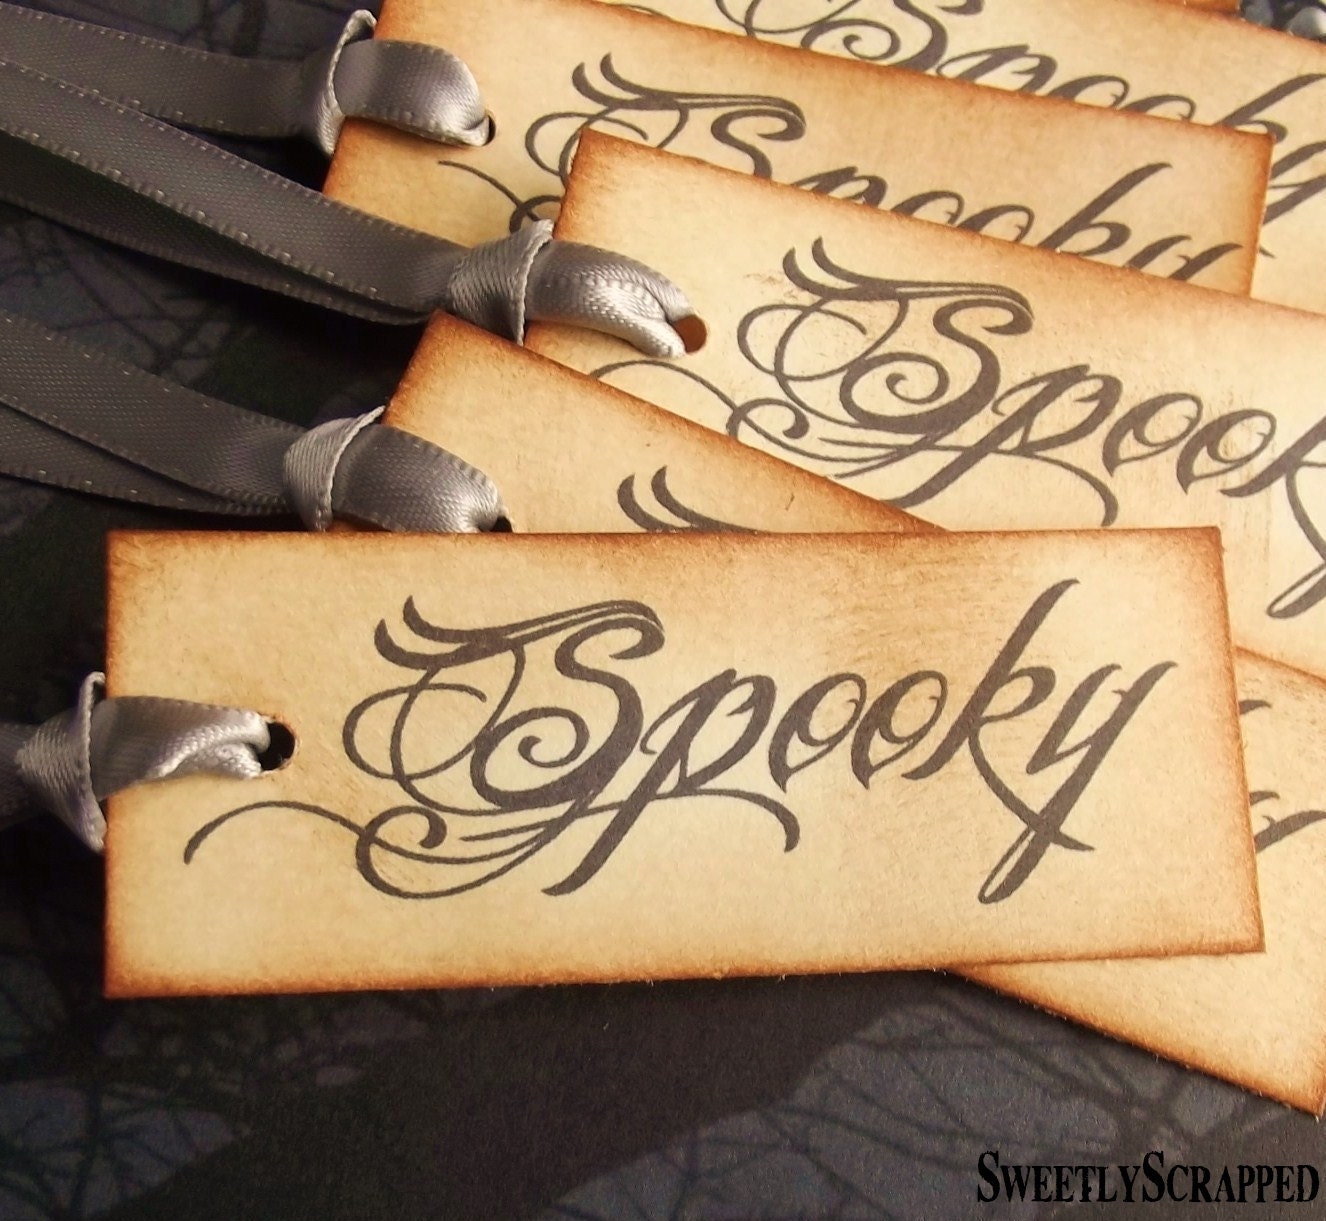 Spooky Halloween Tags - Script, Vintage Inspired, Black Text, Hand Aged, Silver Ribbon